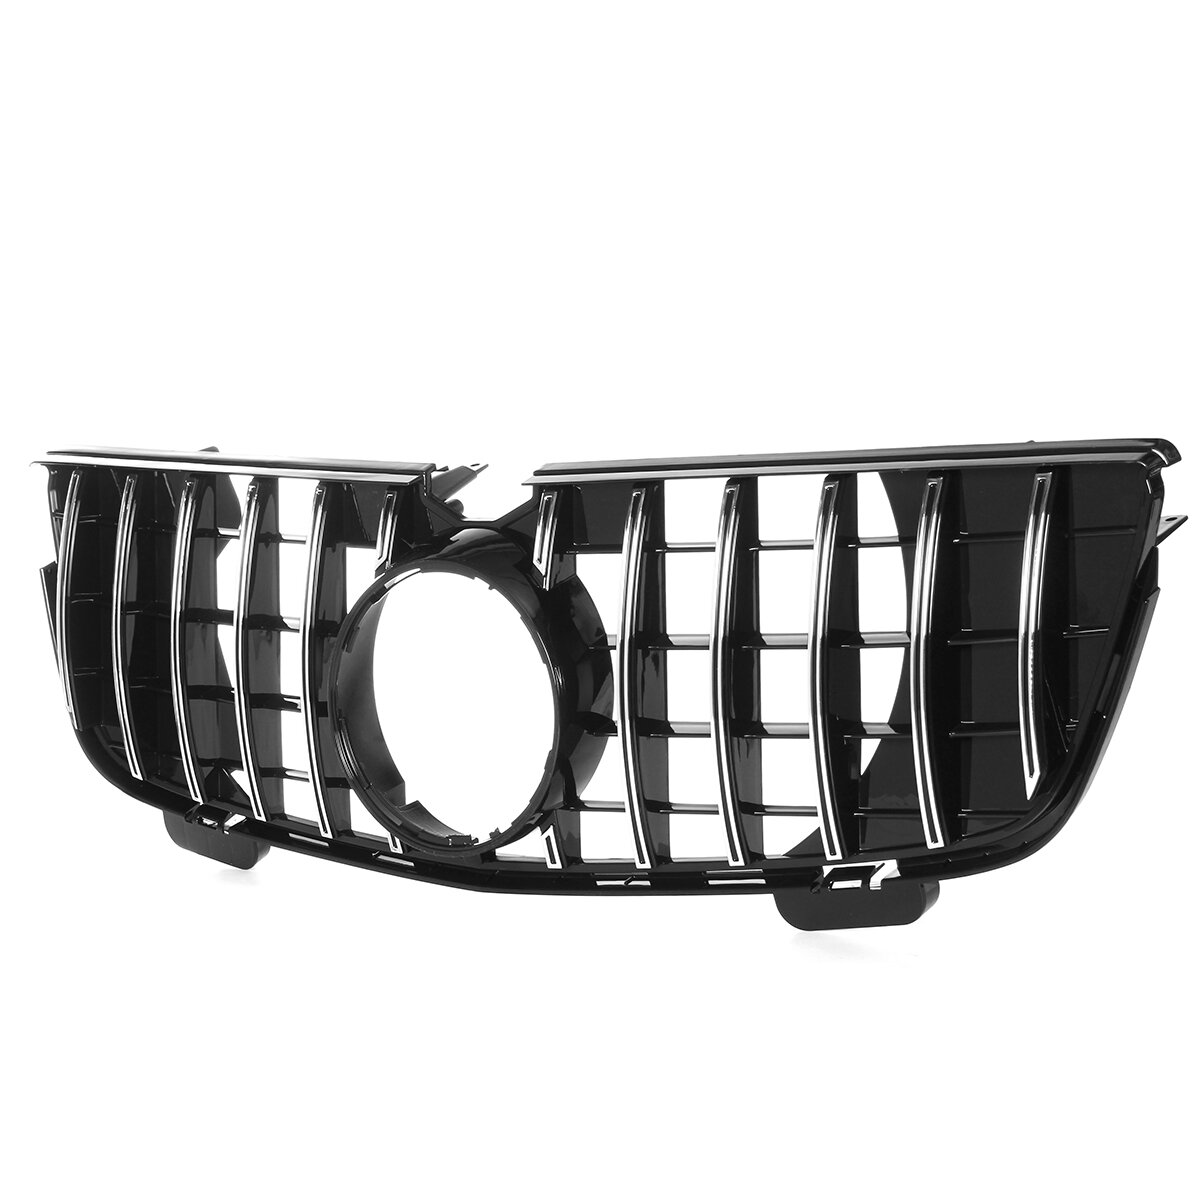 

Chrome Silver GTR Style Front Grill Grille For Mercedes-Benz GL-Class X164 GL320 GL450 GL350 2007-2012